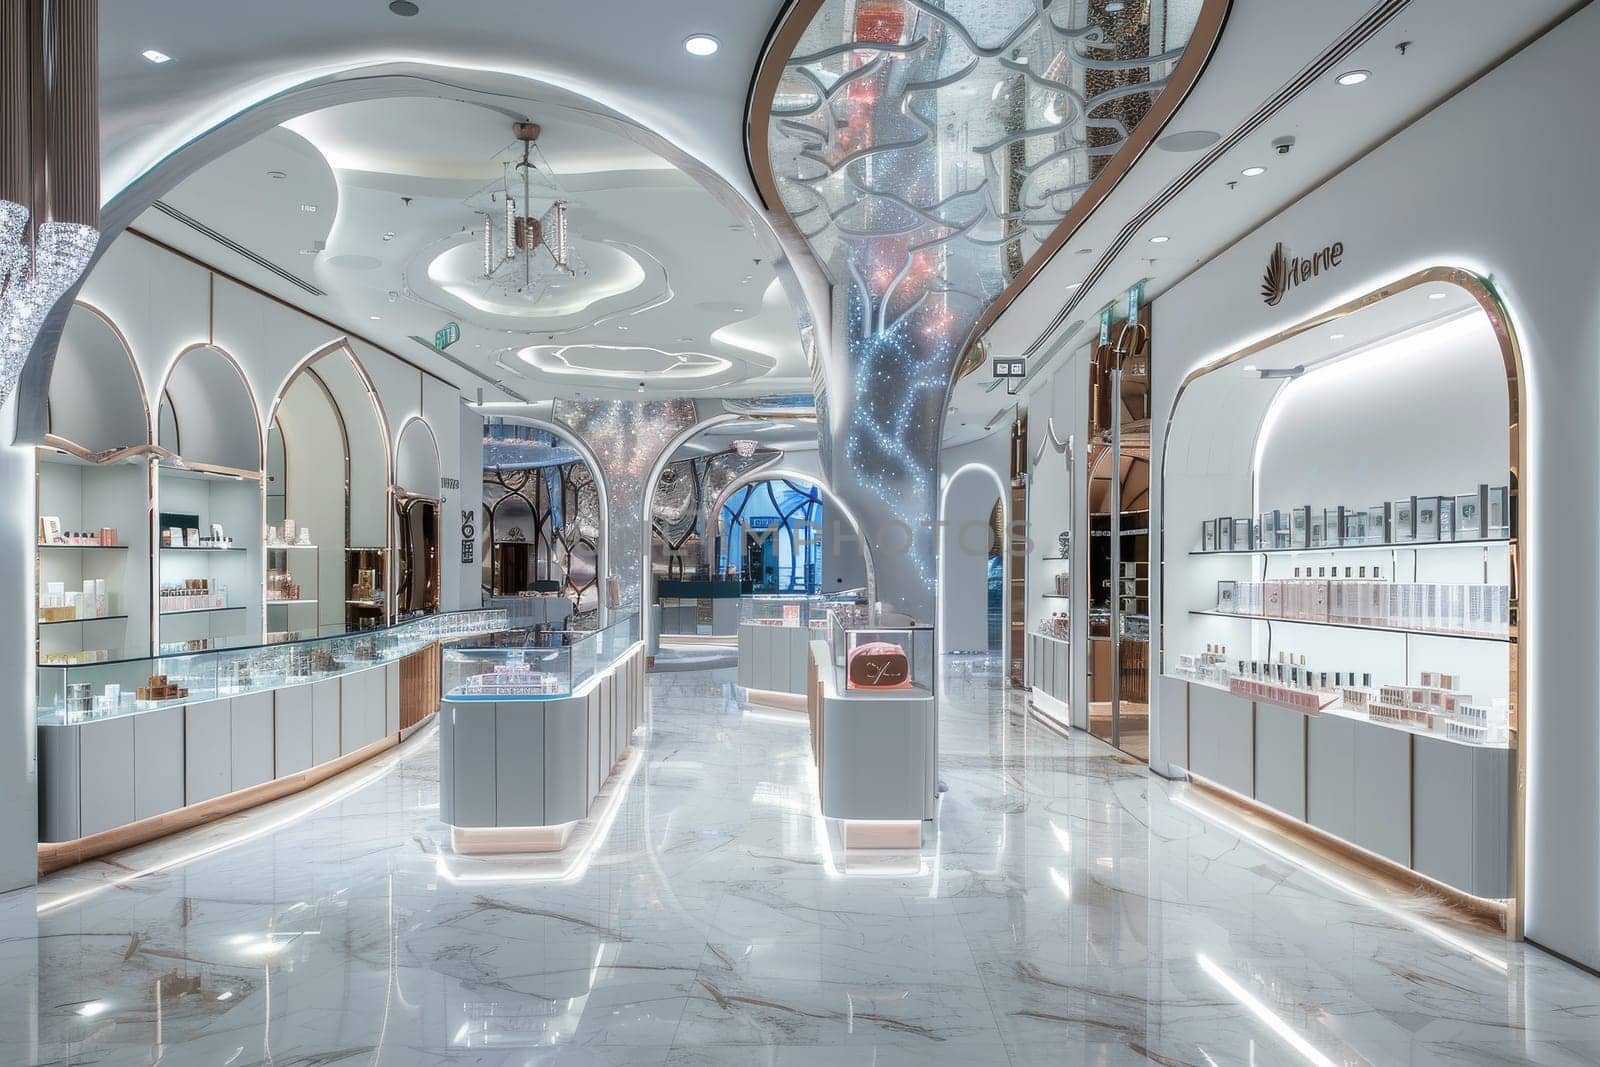 A store with a white interior and gold accents. The store is filled with many shelves and displays of perfume